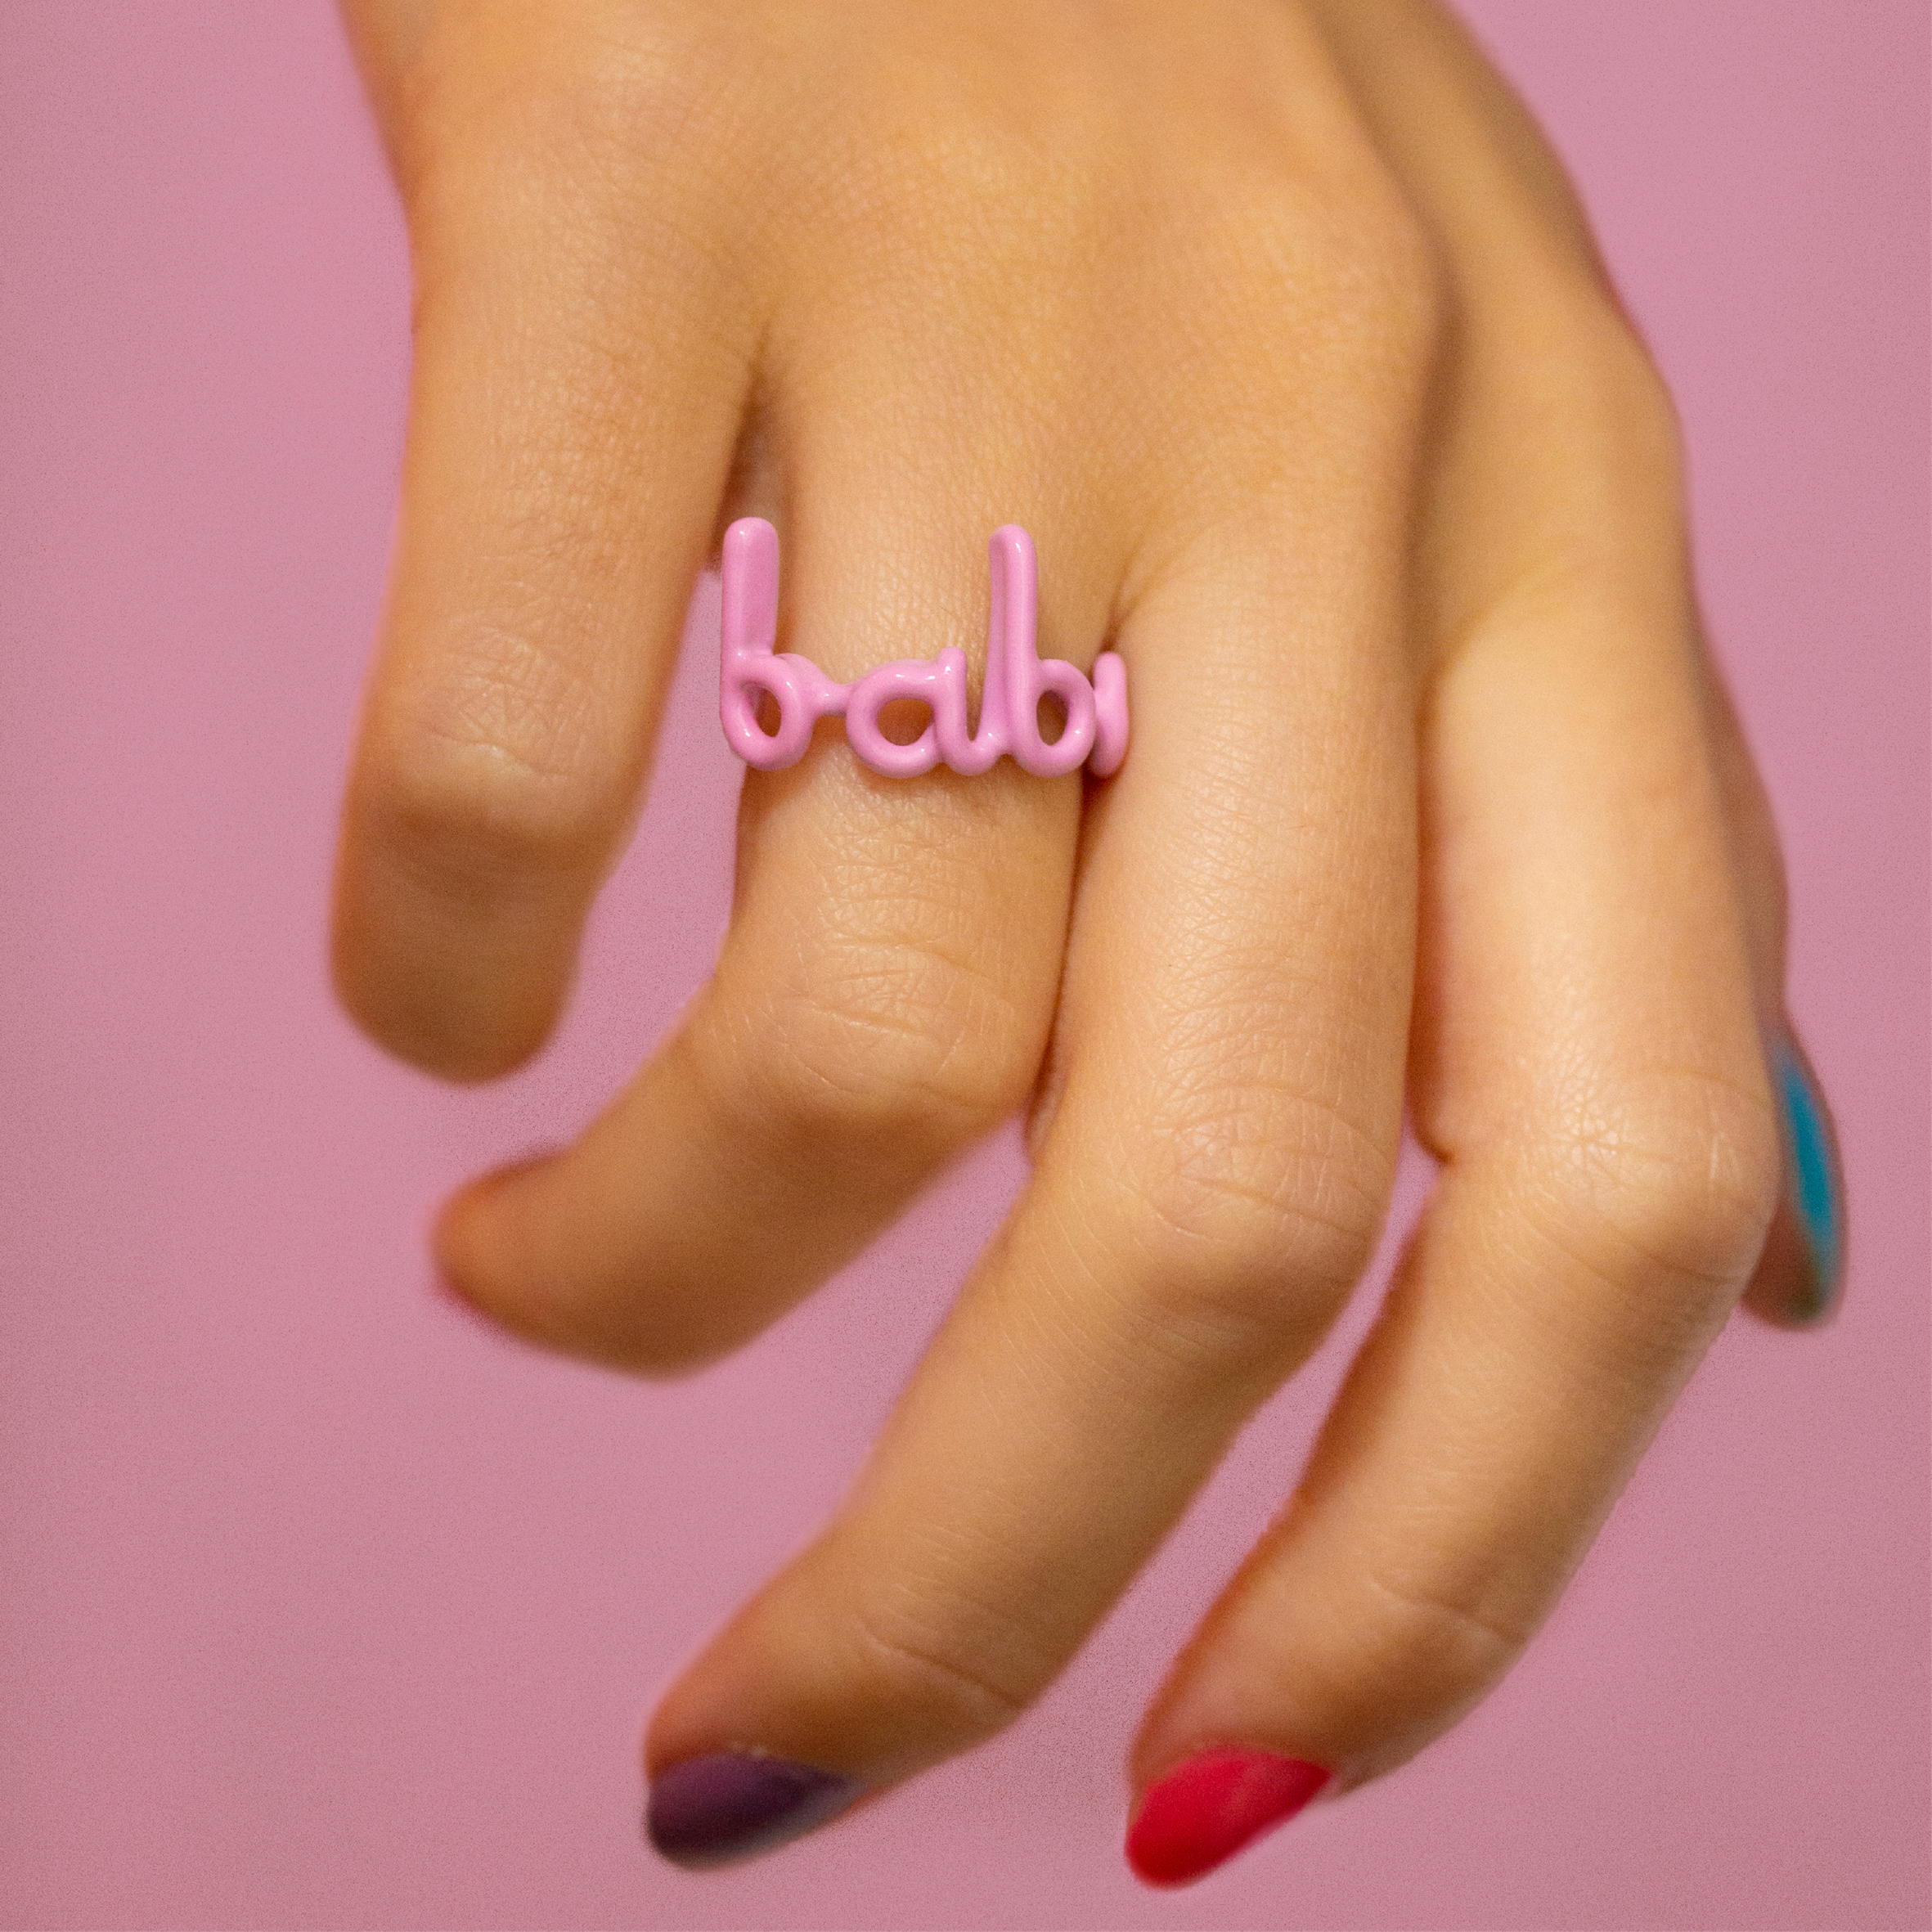 Babe Hotscripts silver and pink enamel ring on hand